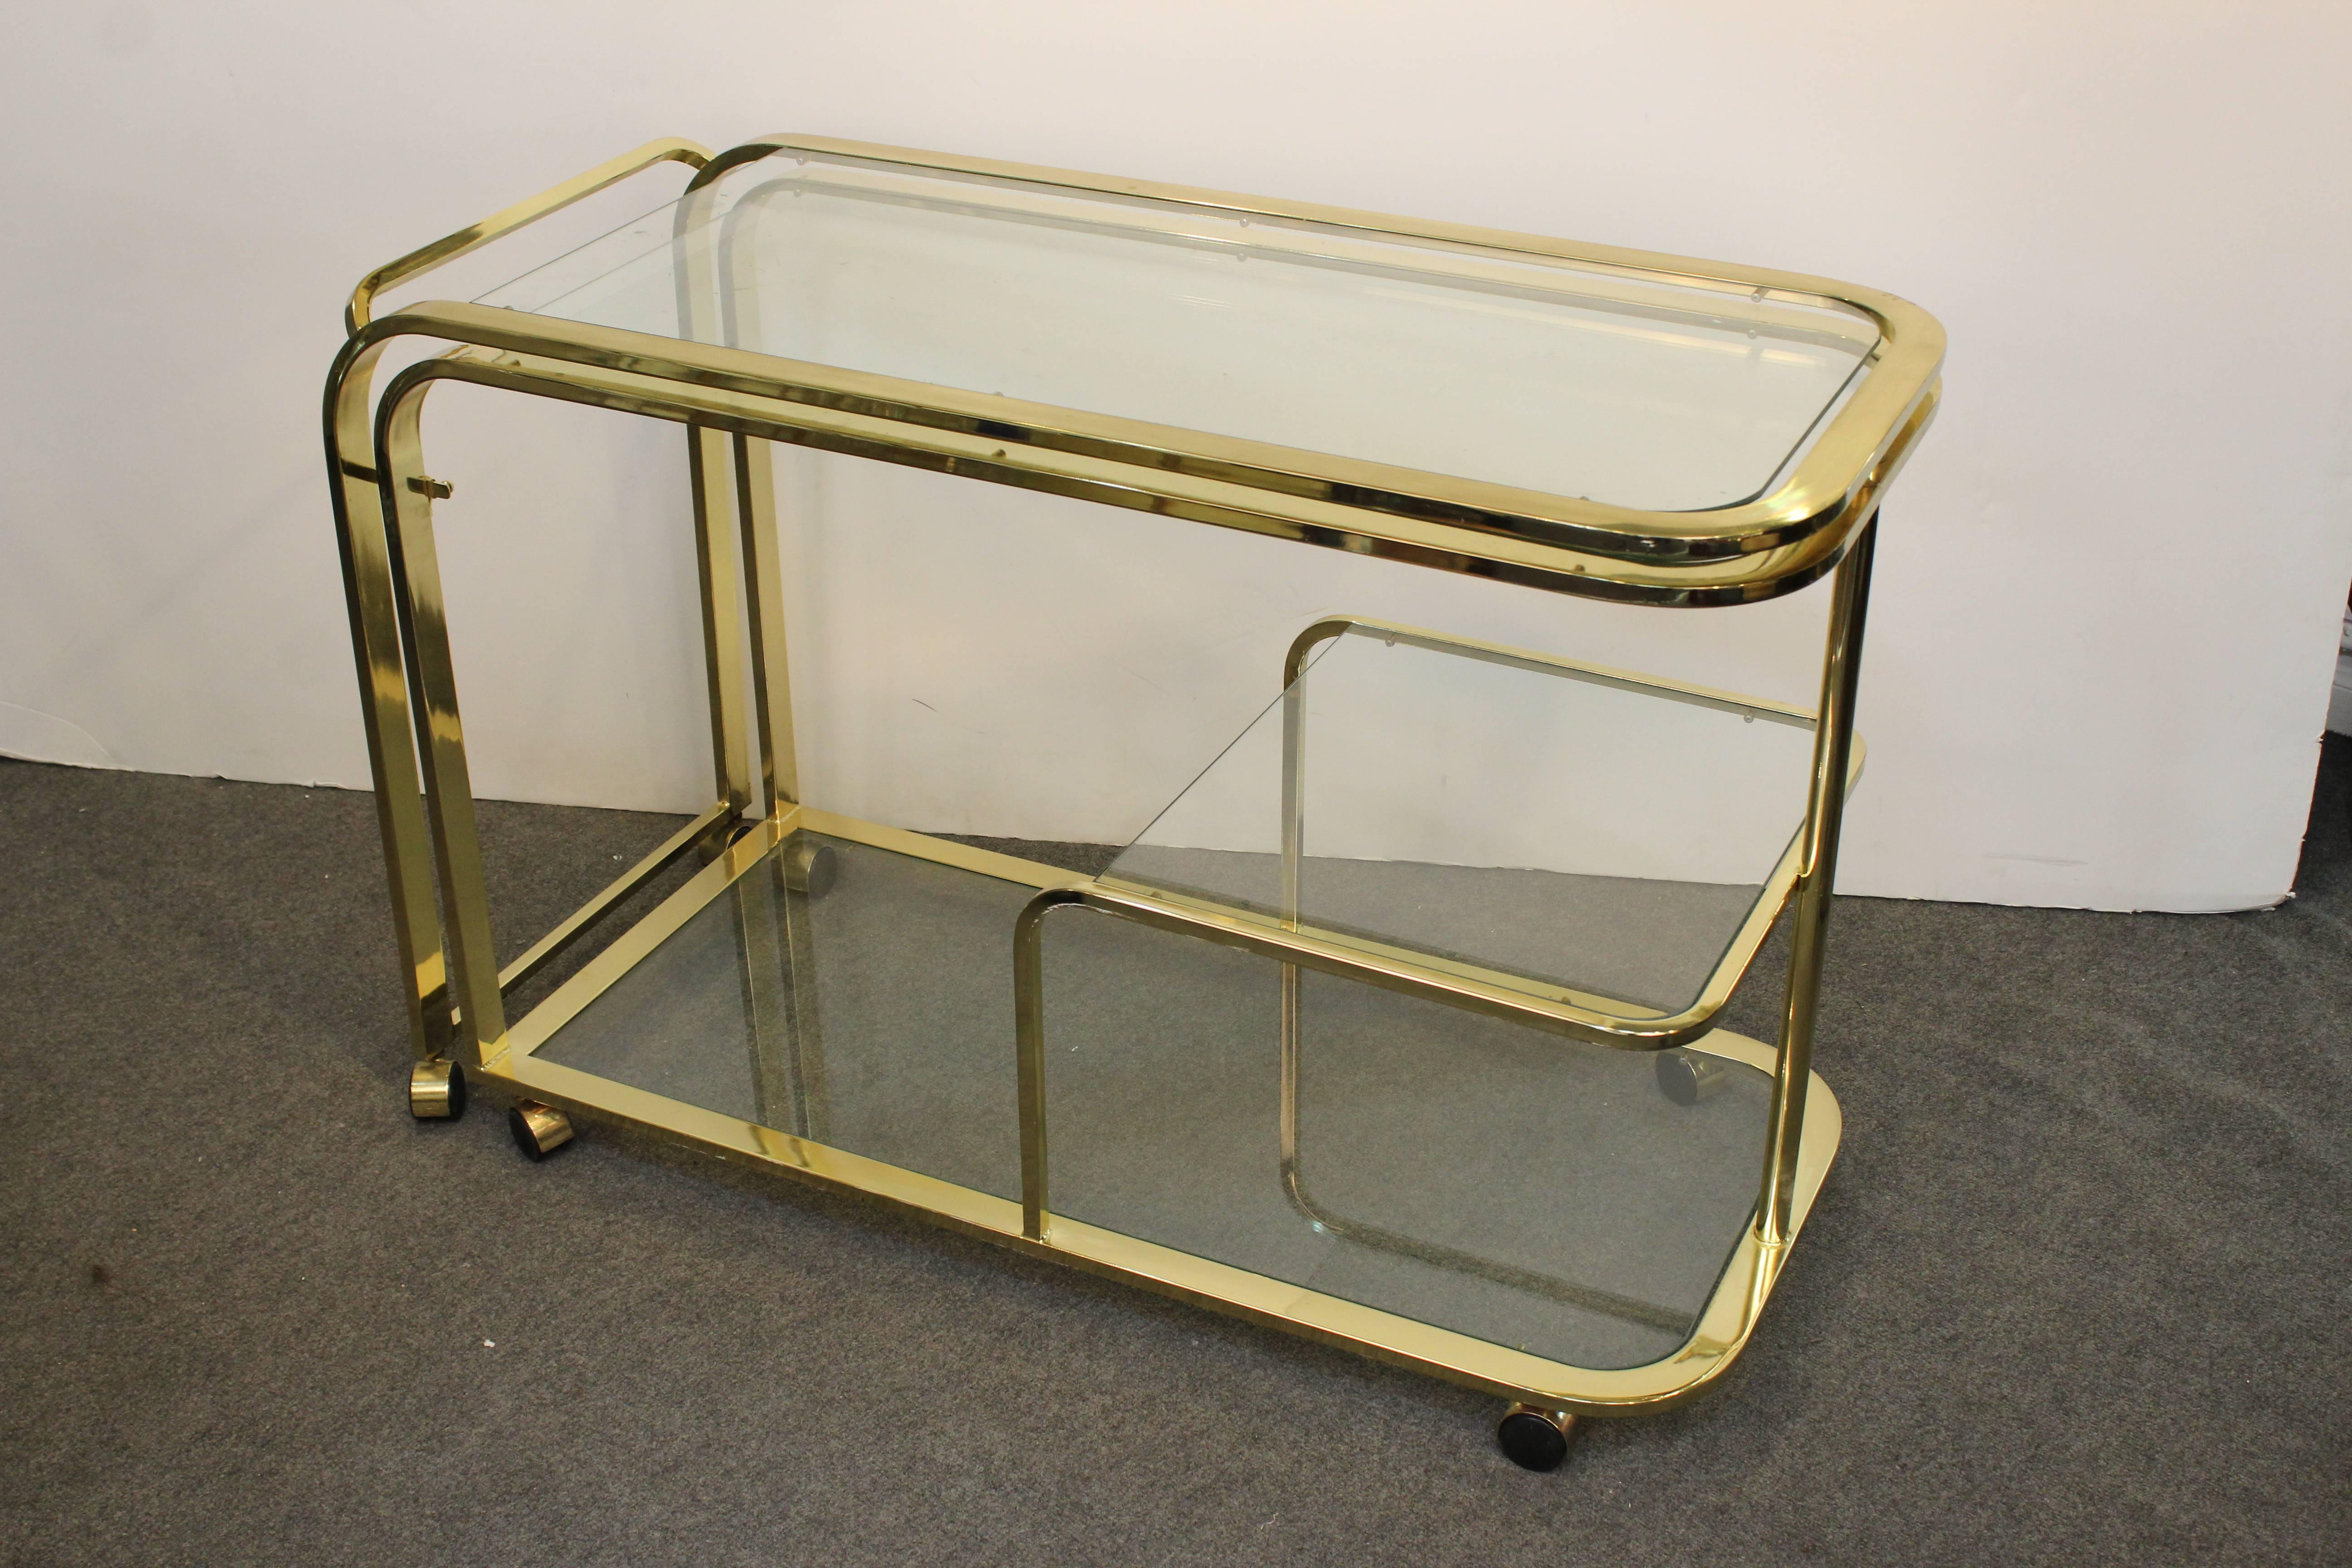 A Hollywood Regency monumental expandable bar cart made by Design Institute of America. The cart is made of brass and can unfold into a bar twice its original size. Made in the 1970s in the United States. In great vintage condition.